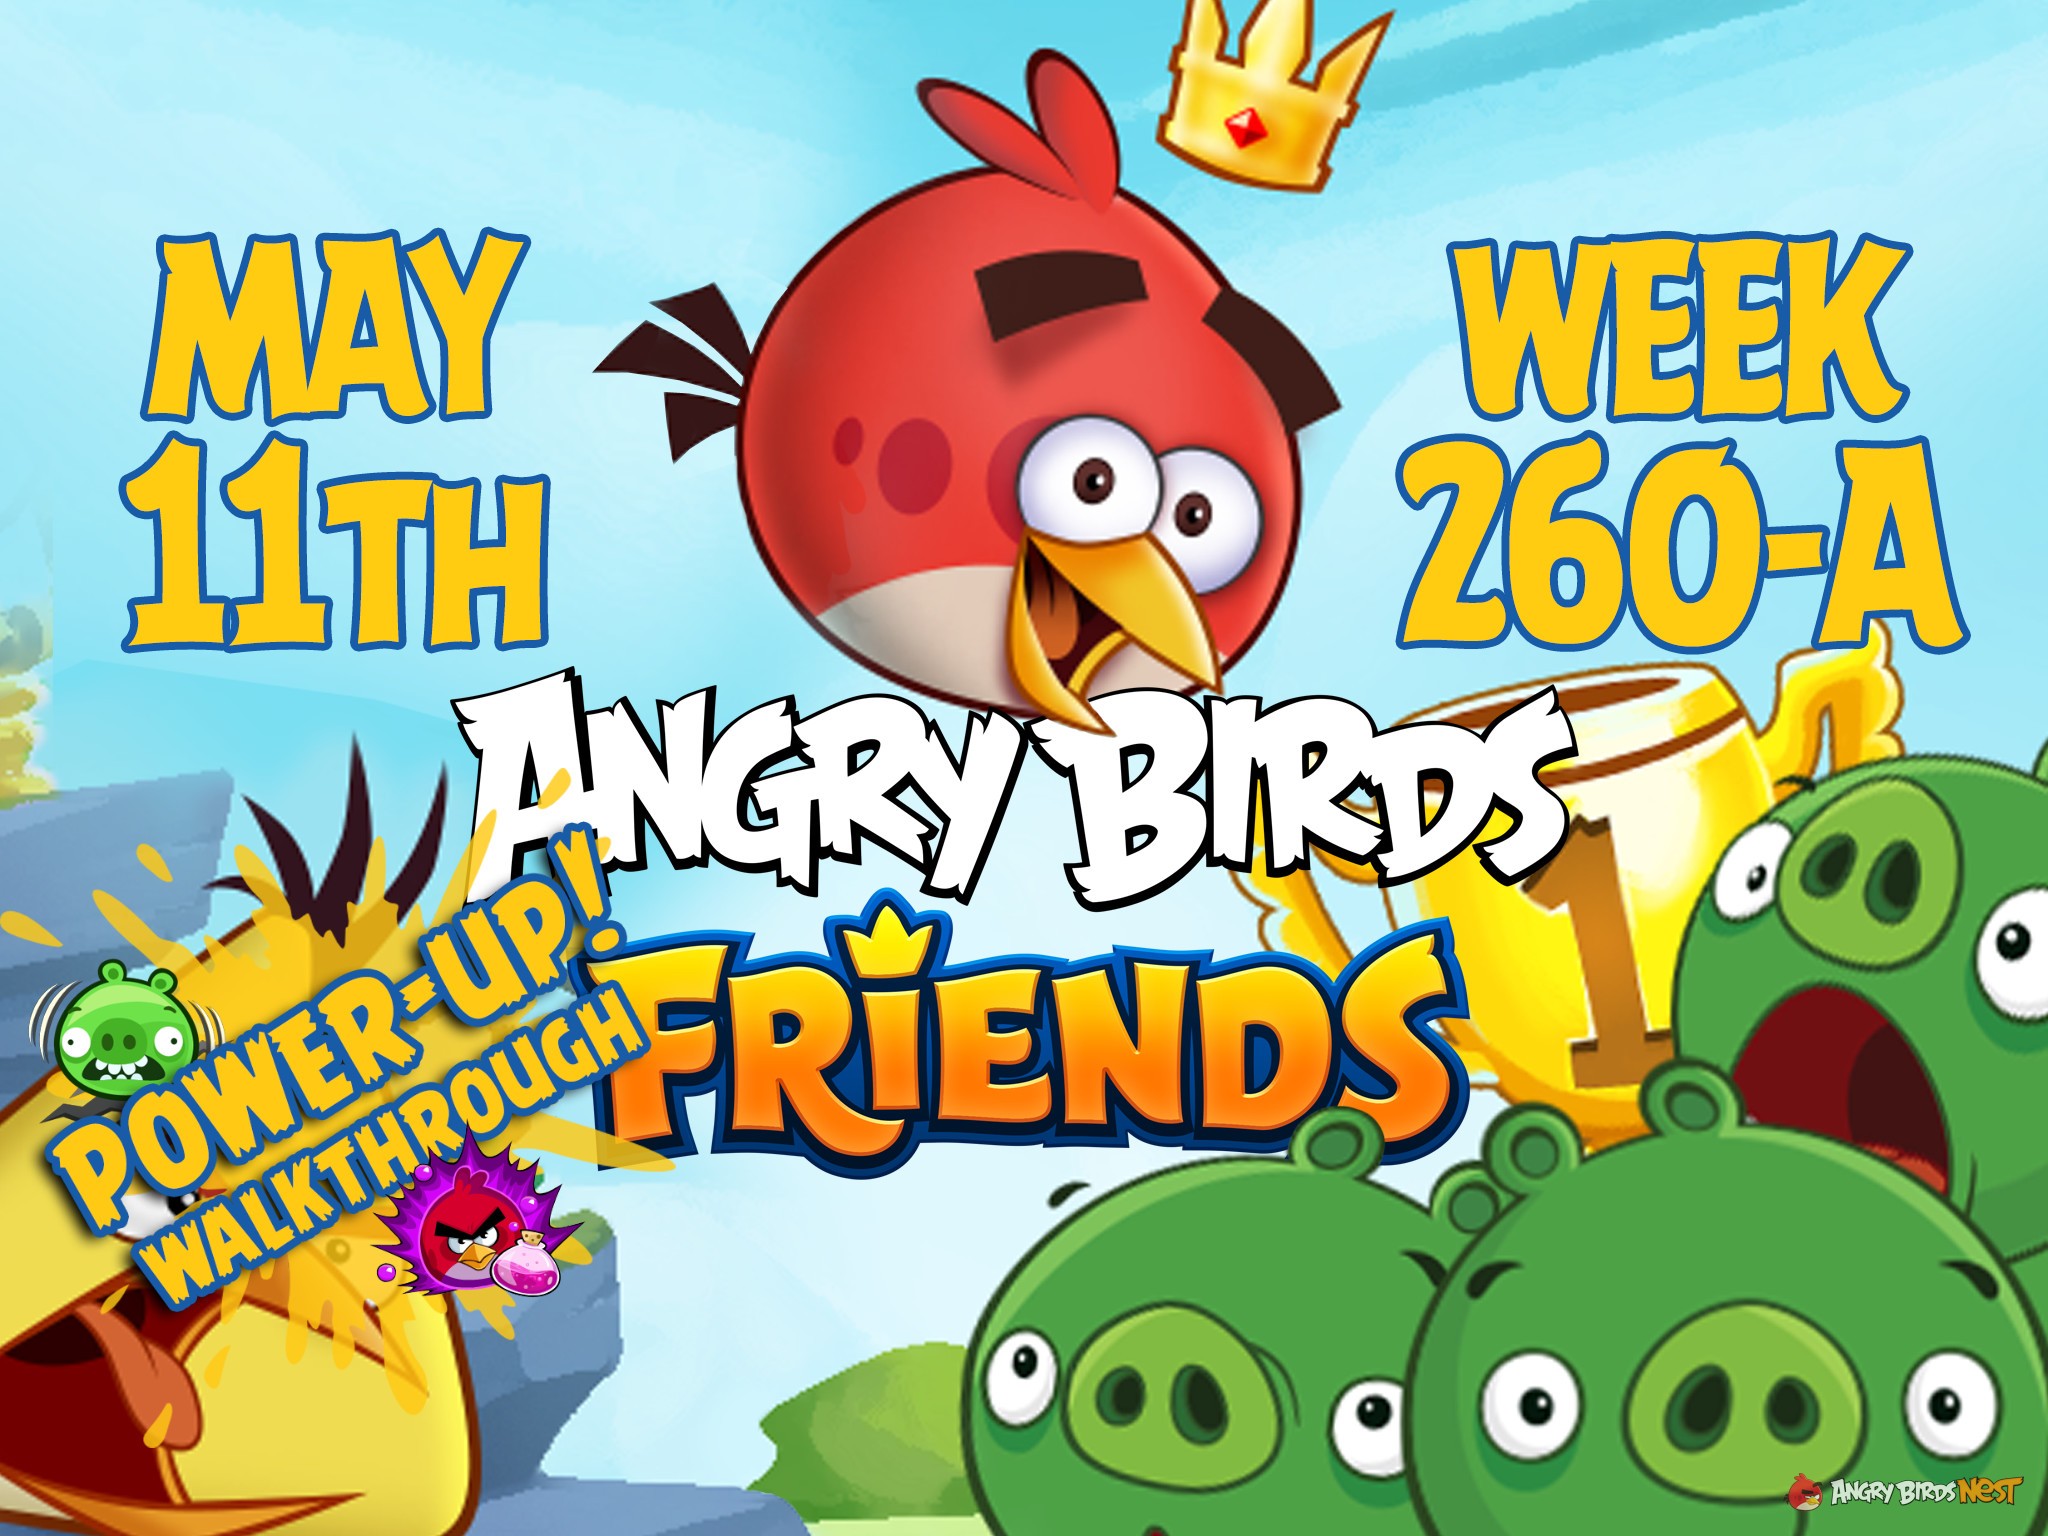 Angry Birds Friends Tournament Week 260-A Feature Image PU